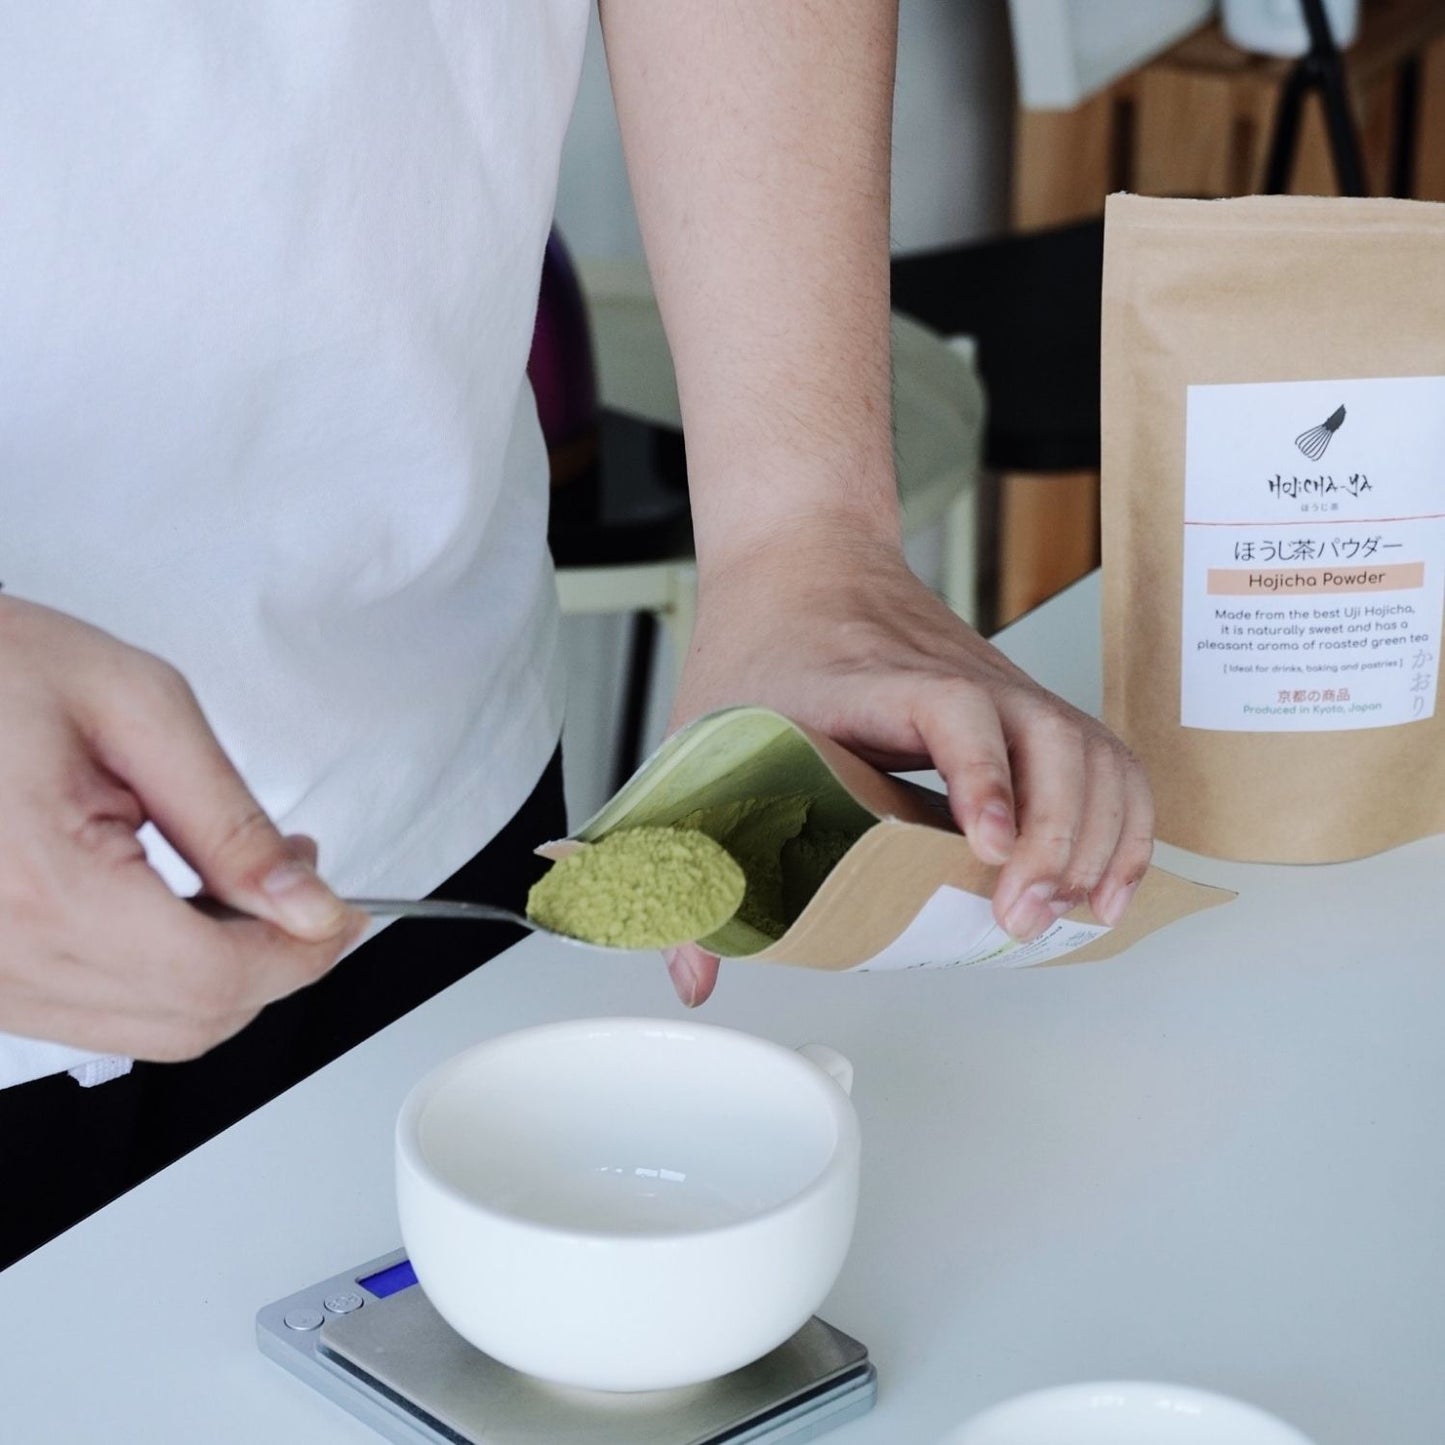 A man is scooping genmaicha powder into the packaging.